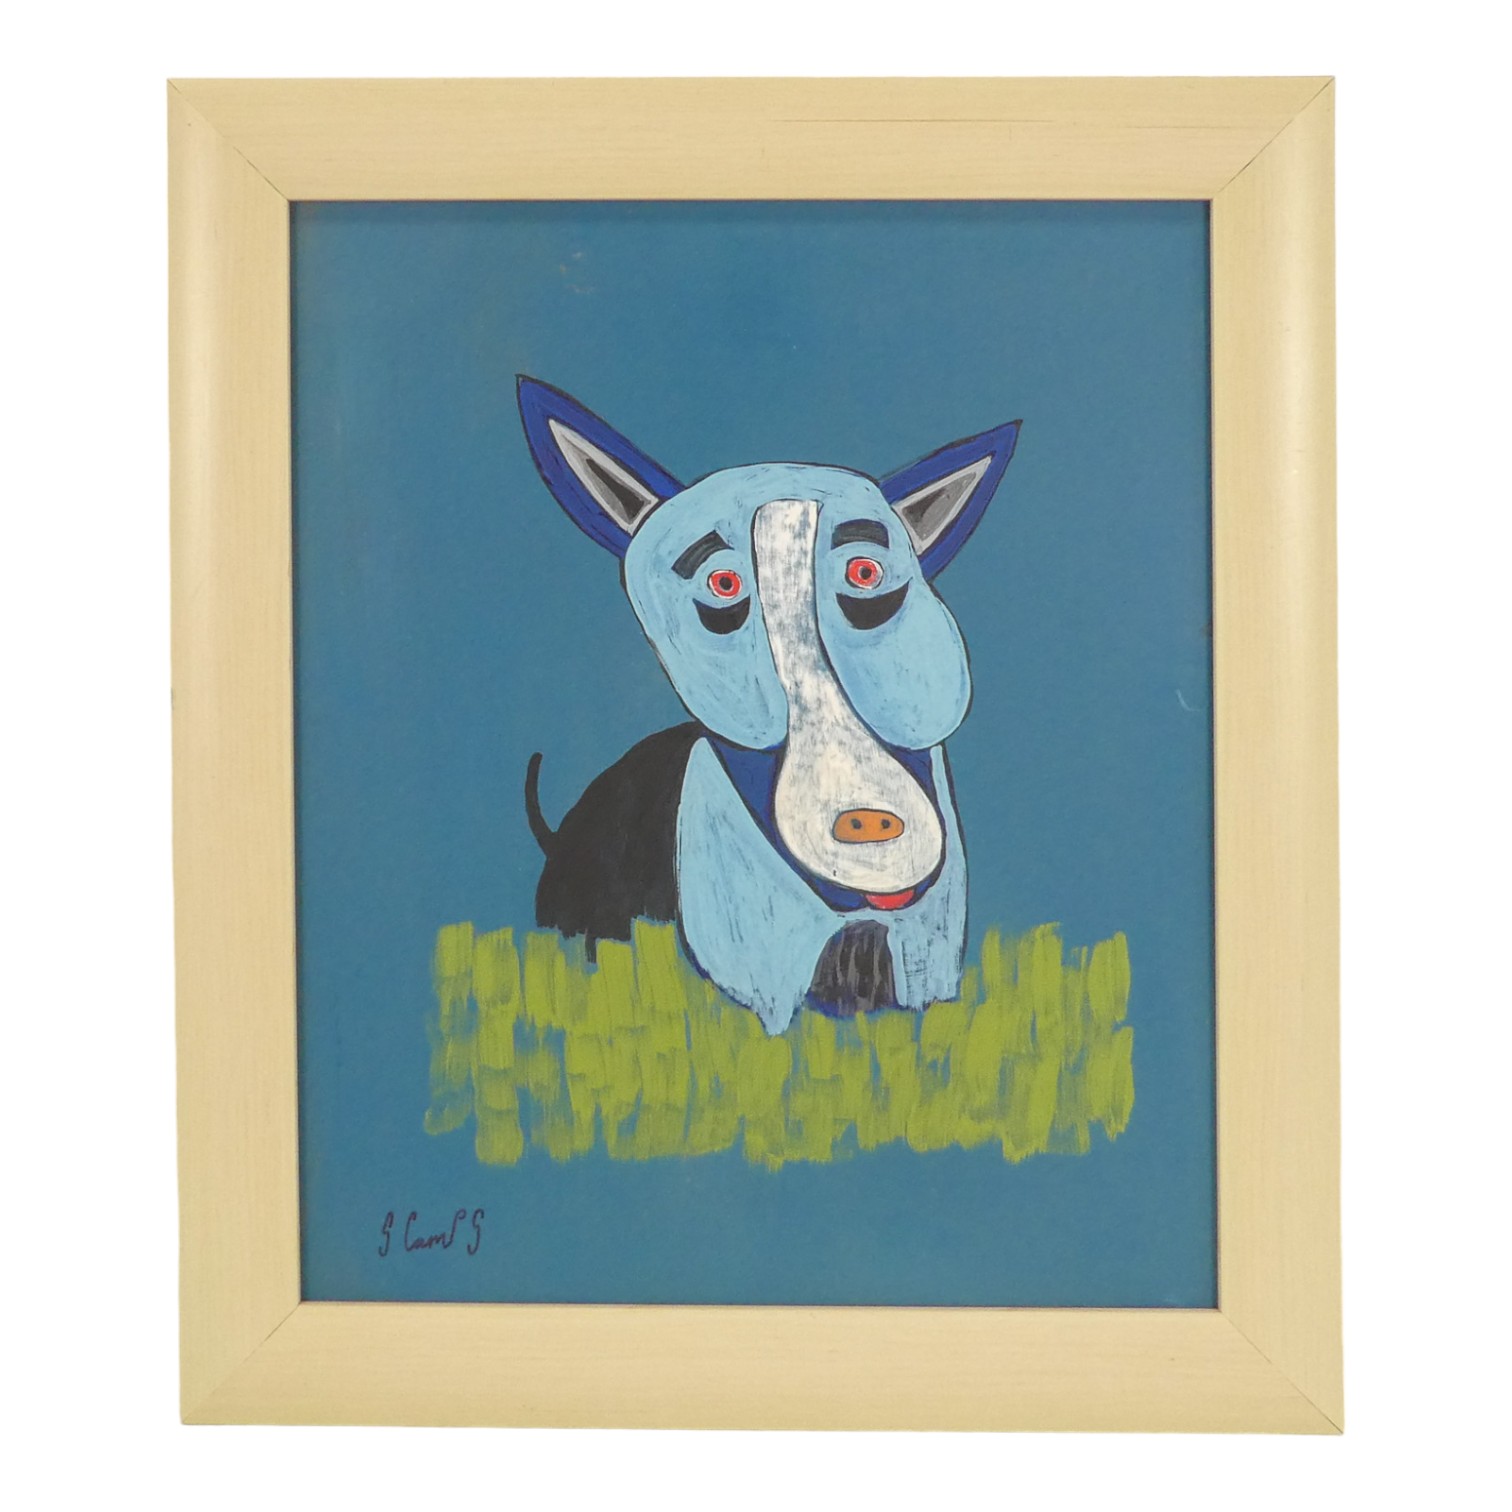 Steve CAMPS (Cornish contemporary b. 1957) Picasso's Dog Acrylic on board Signed lower left, dated - Image 2 of 4